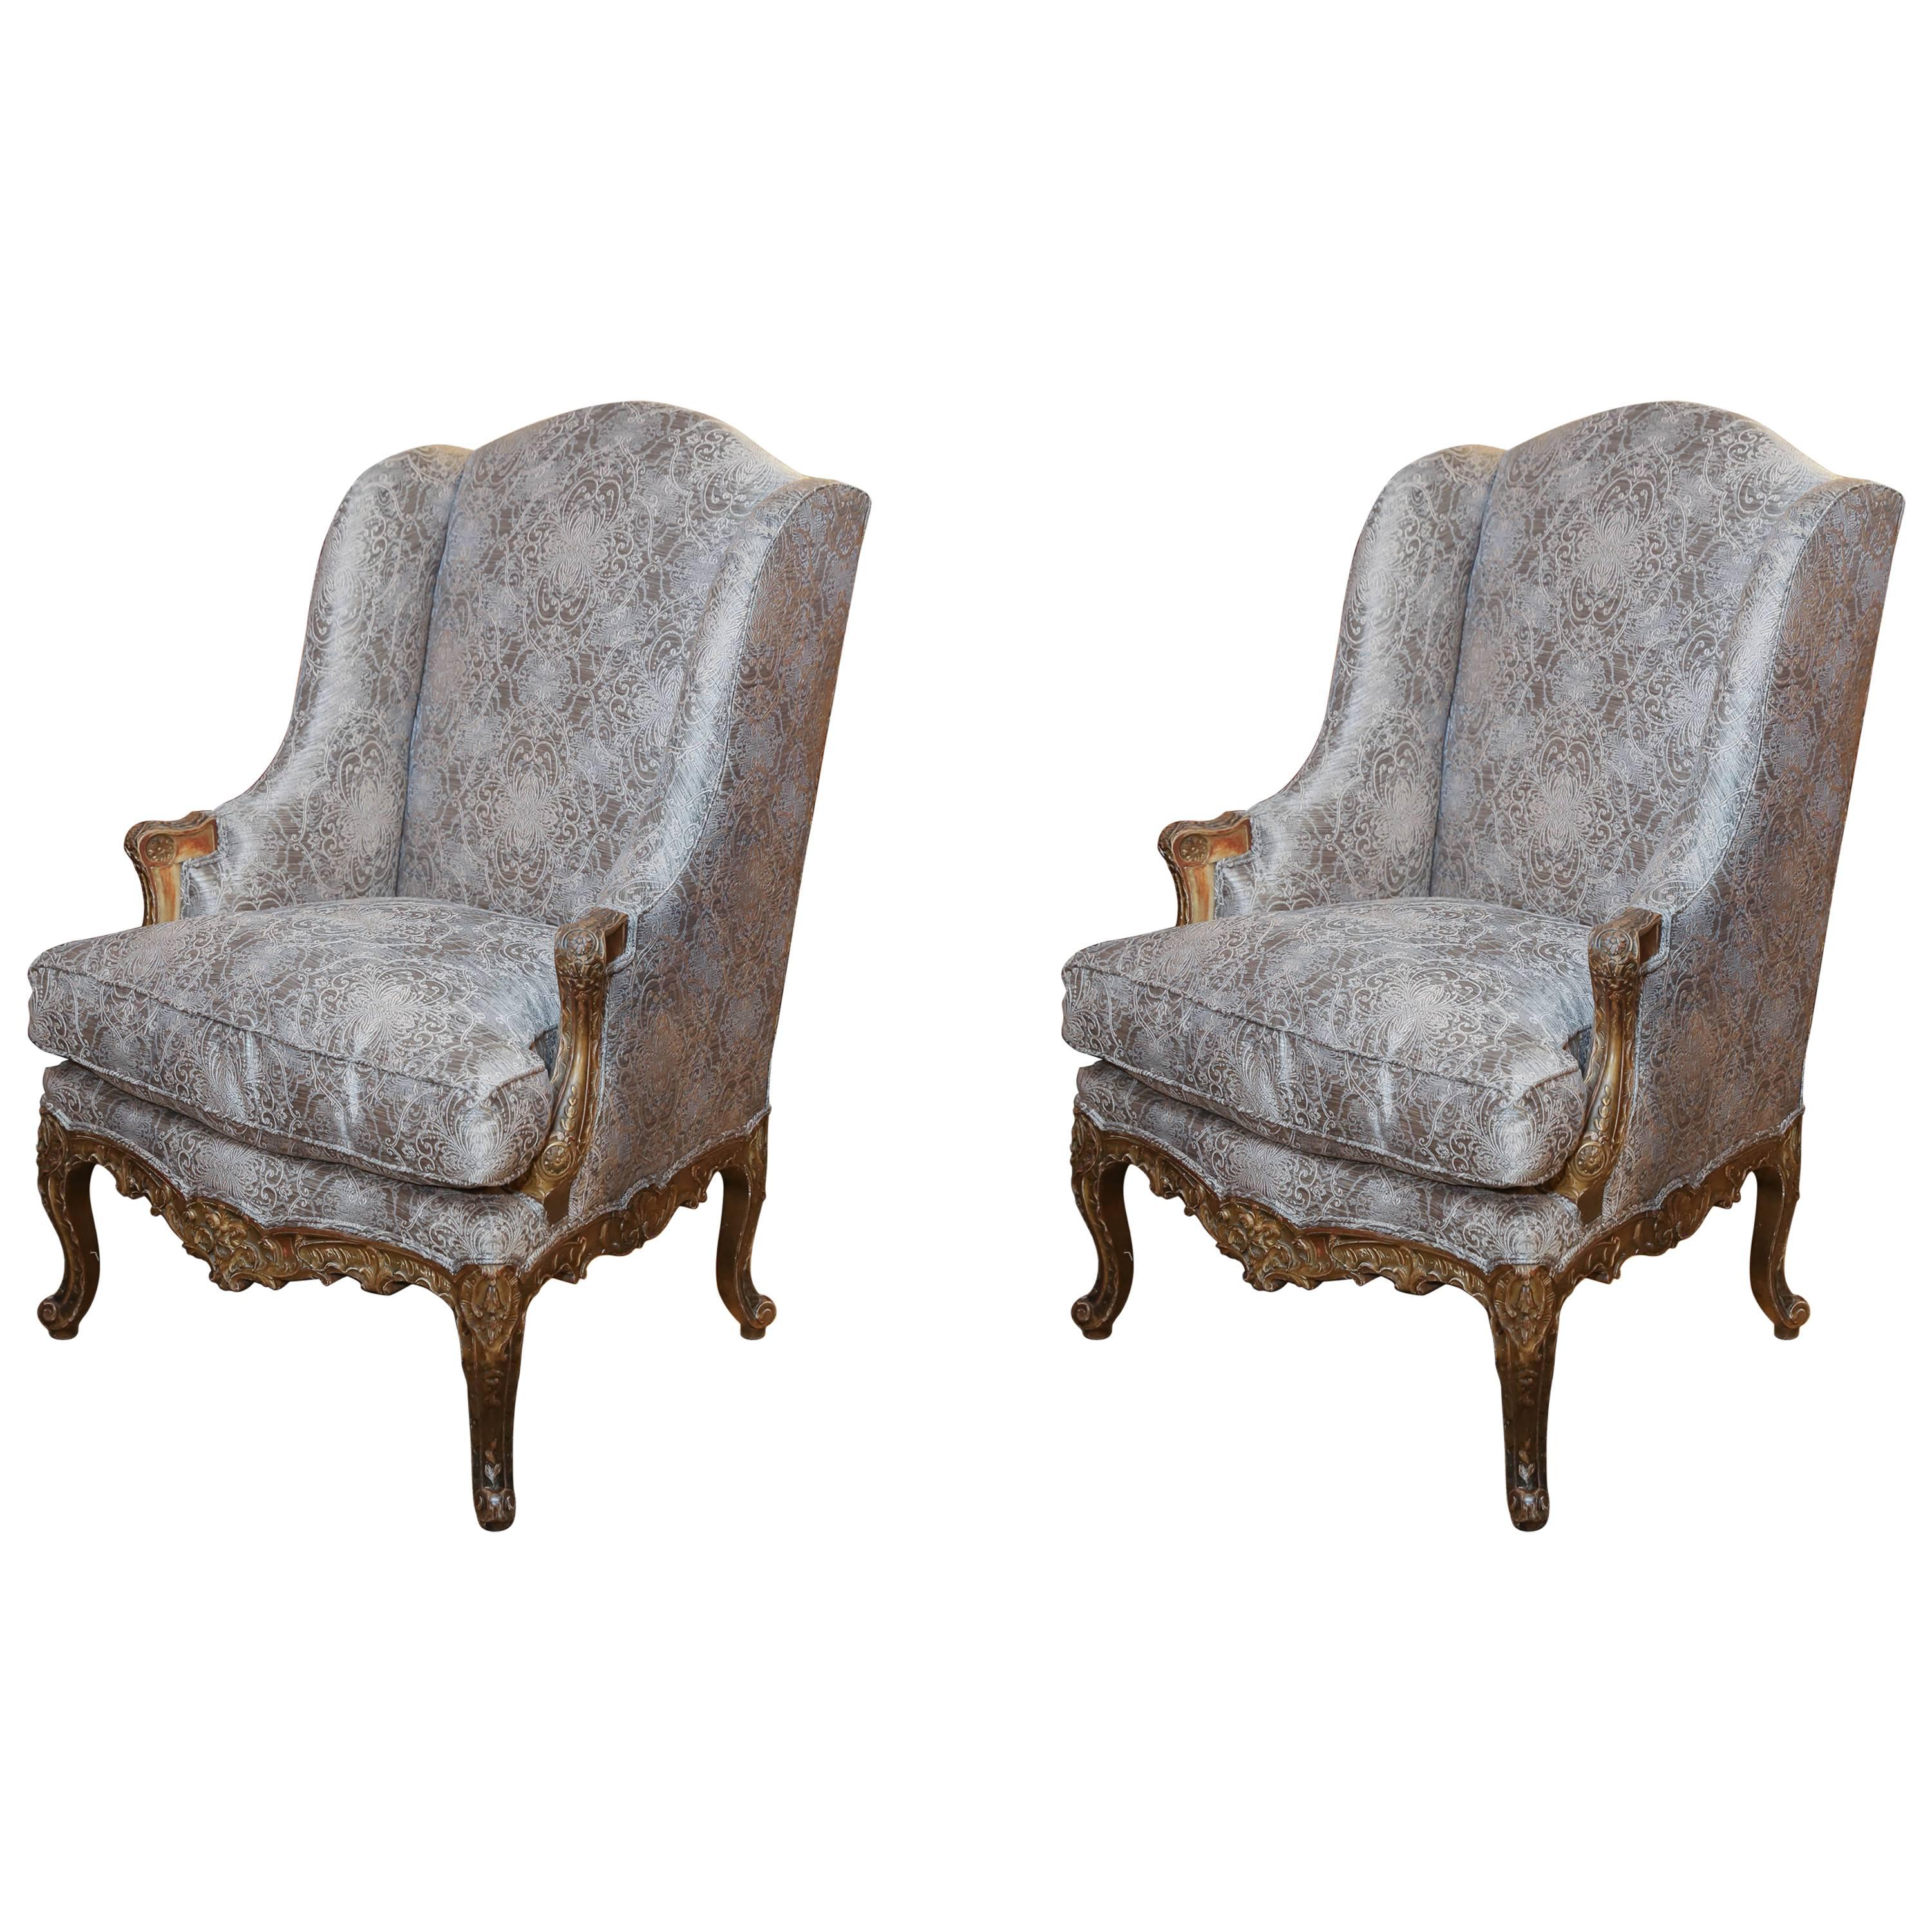 Pair of Tall Bergere French Chairs with Gilt and Carved Wood, Louis XV Style For Sale